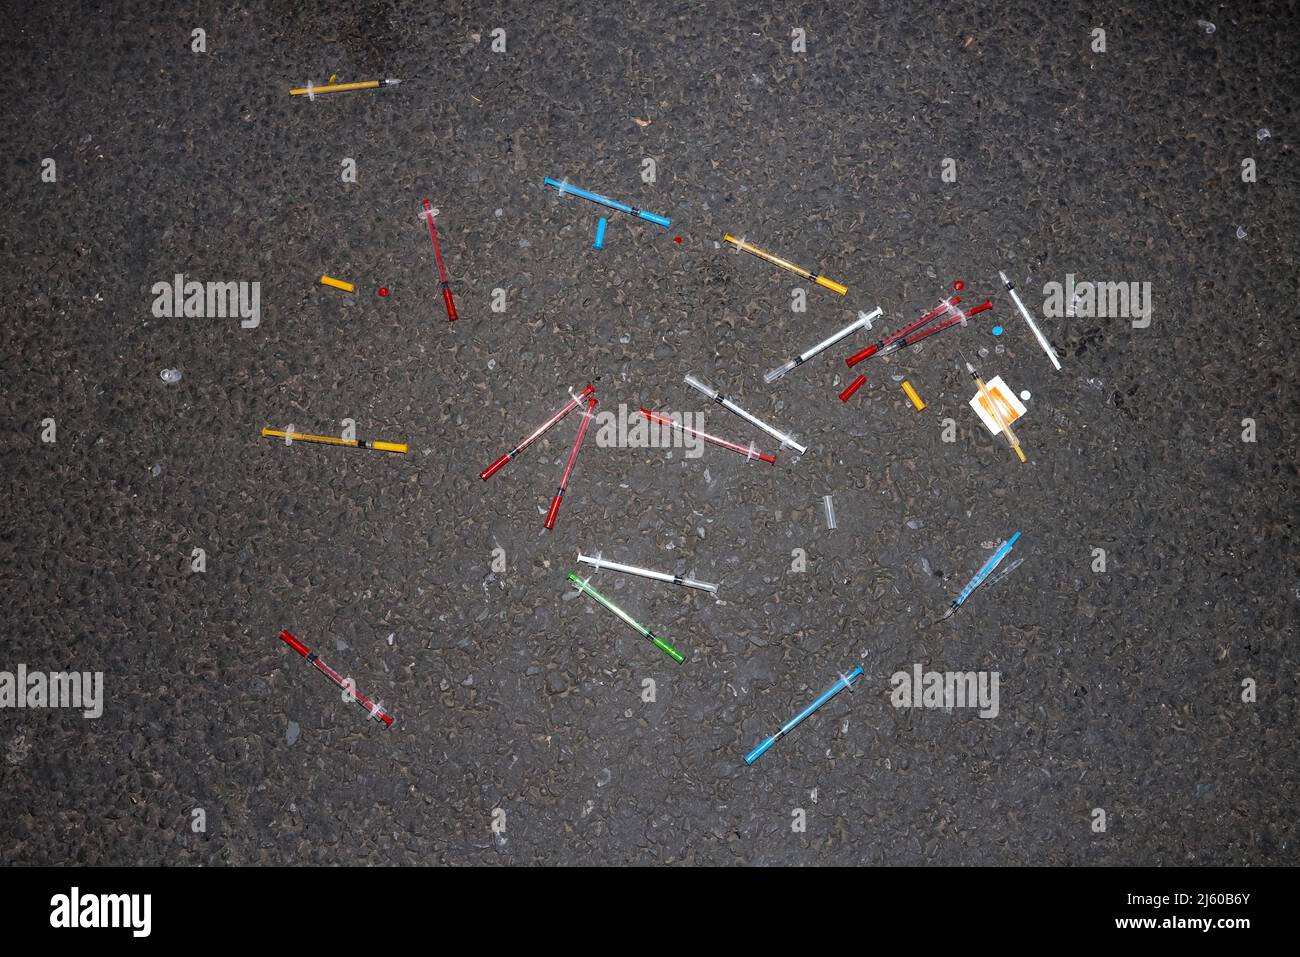 A load of colourful drug needles found in the street in Exeter, Devon, UK. Stock Photo